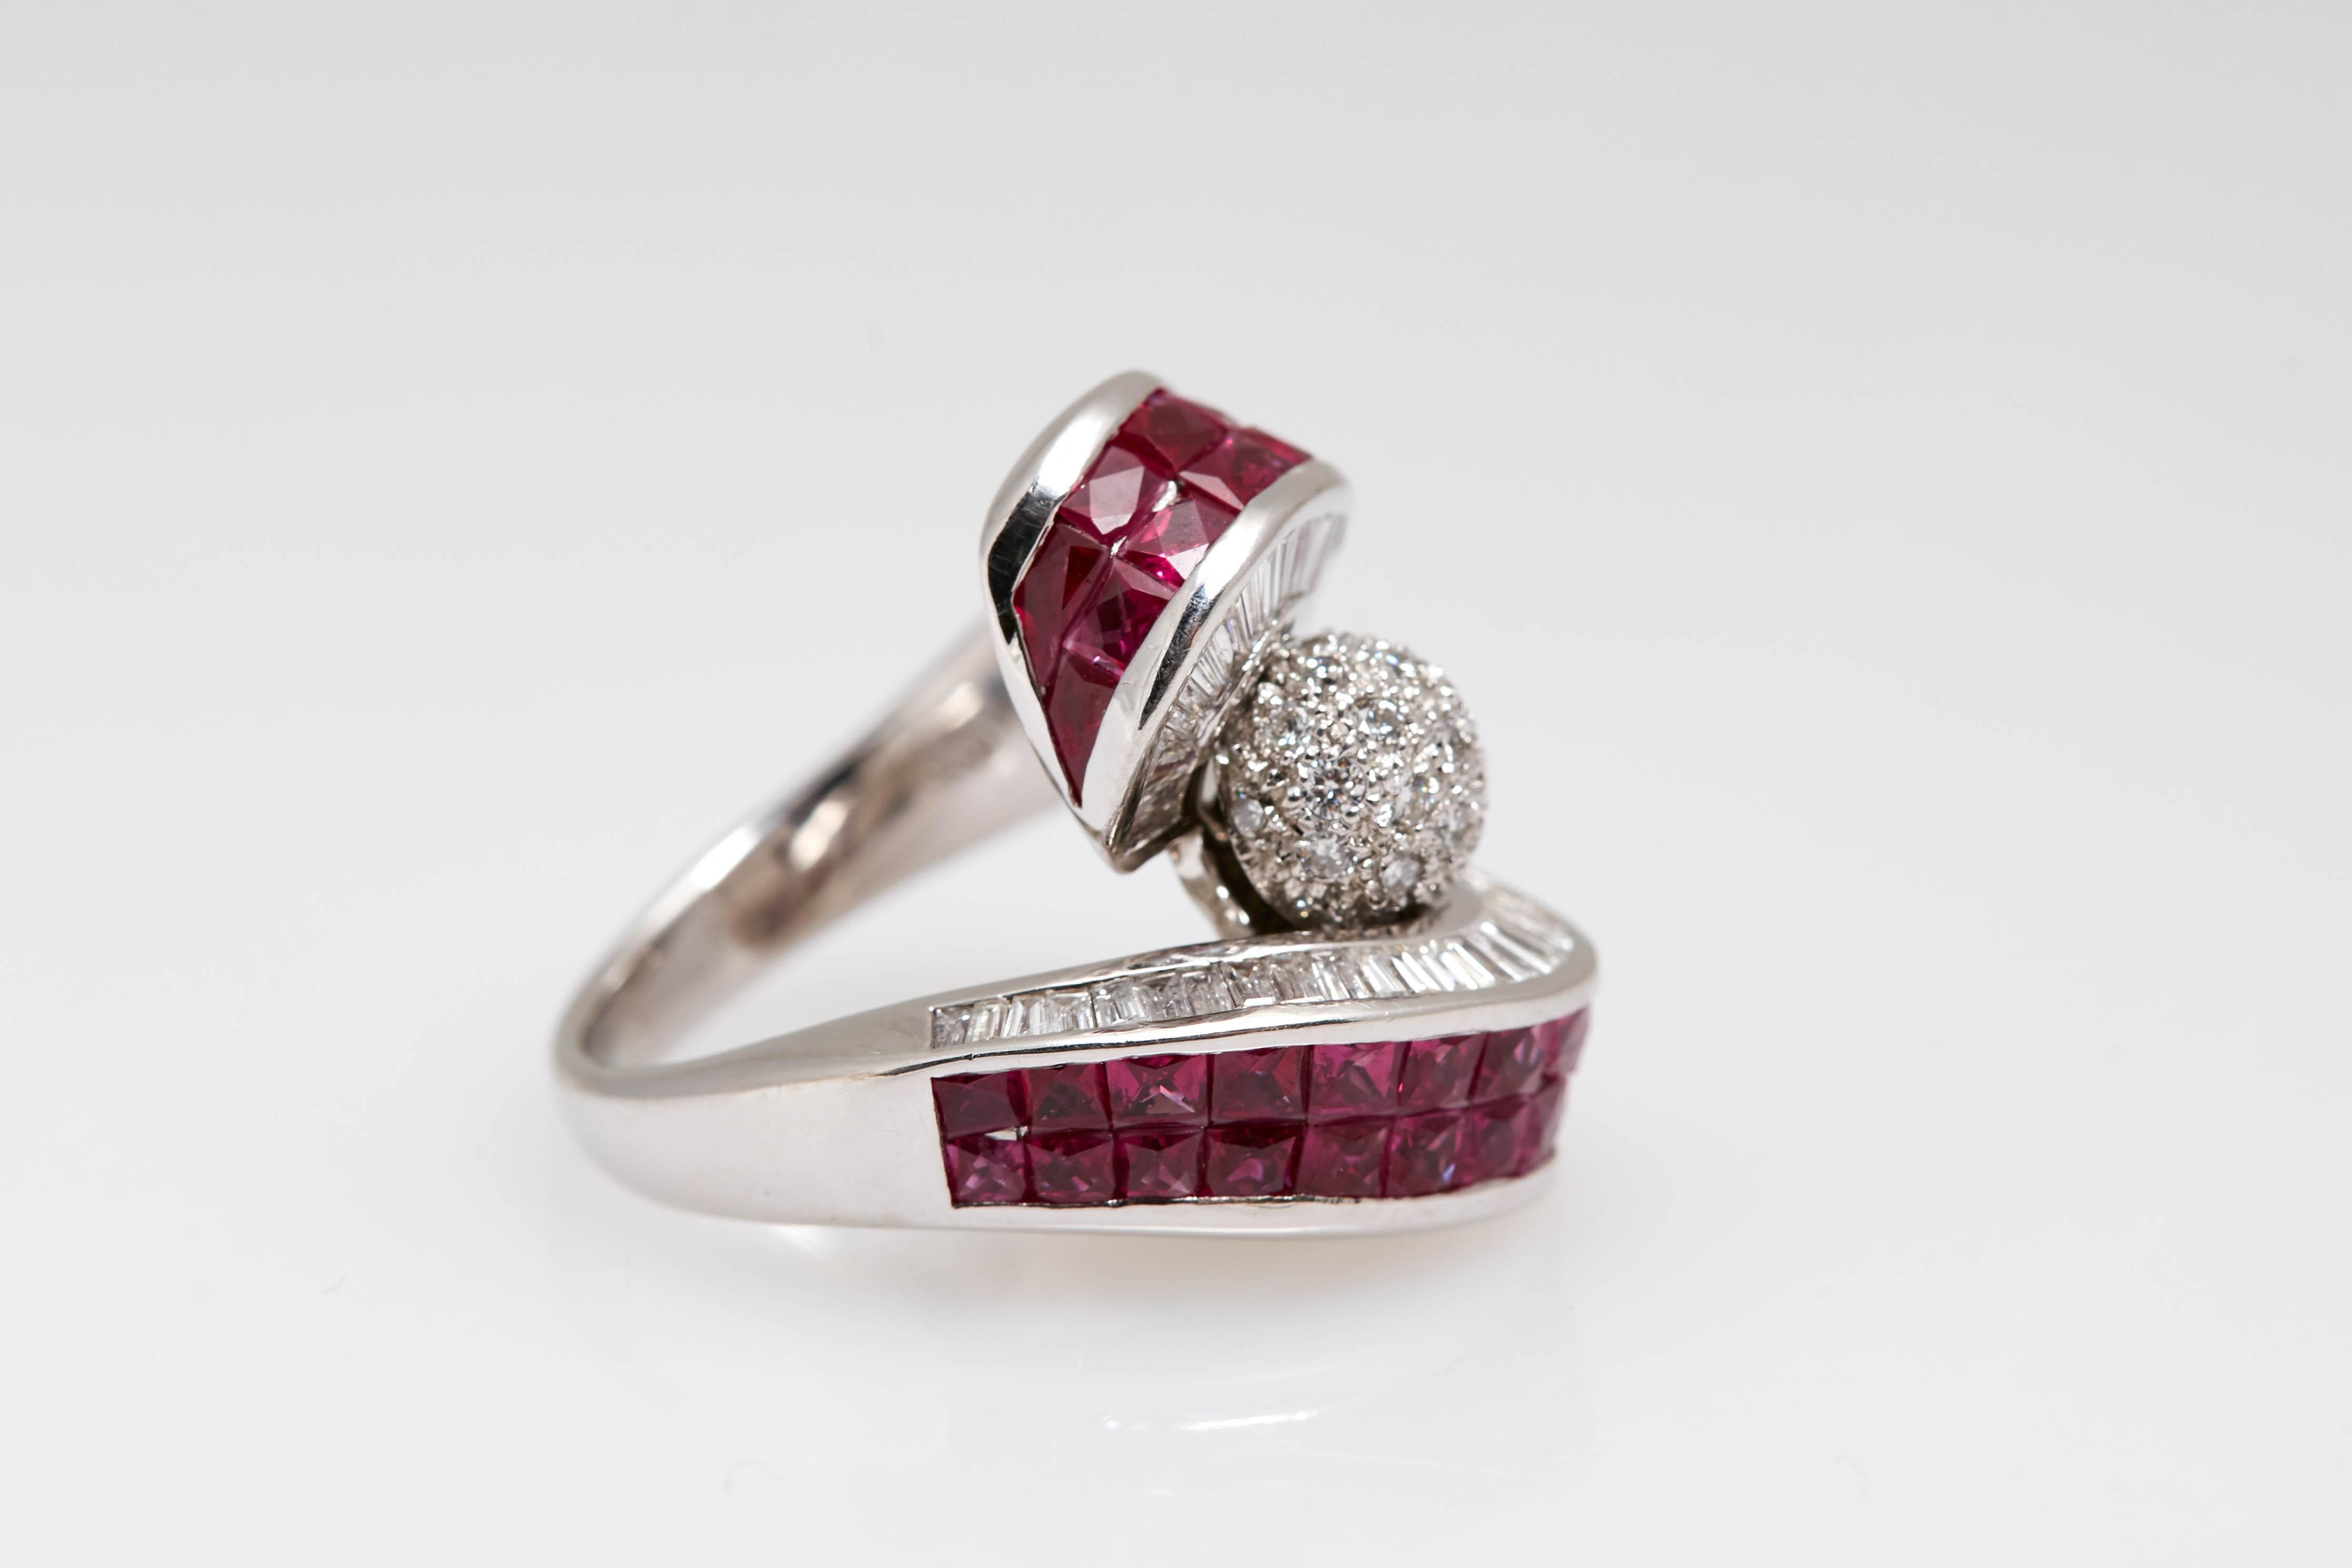 Ring in 18kt white gold with Invisible set rubies (4.8cts) and diamonds (2.7cts). Made in the United States, circa 1980